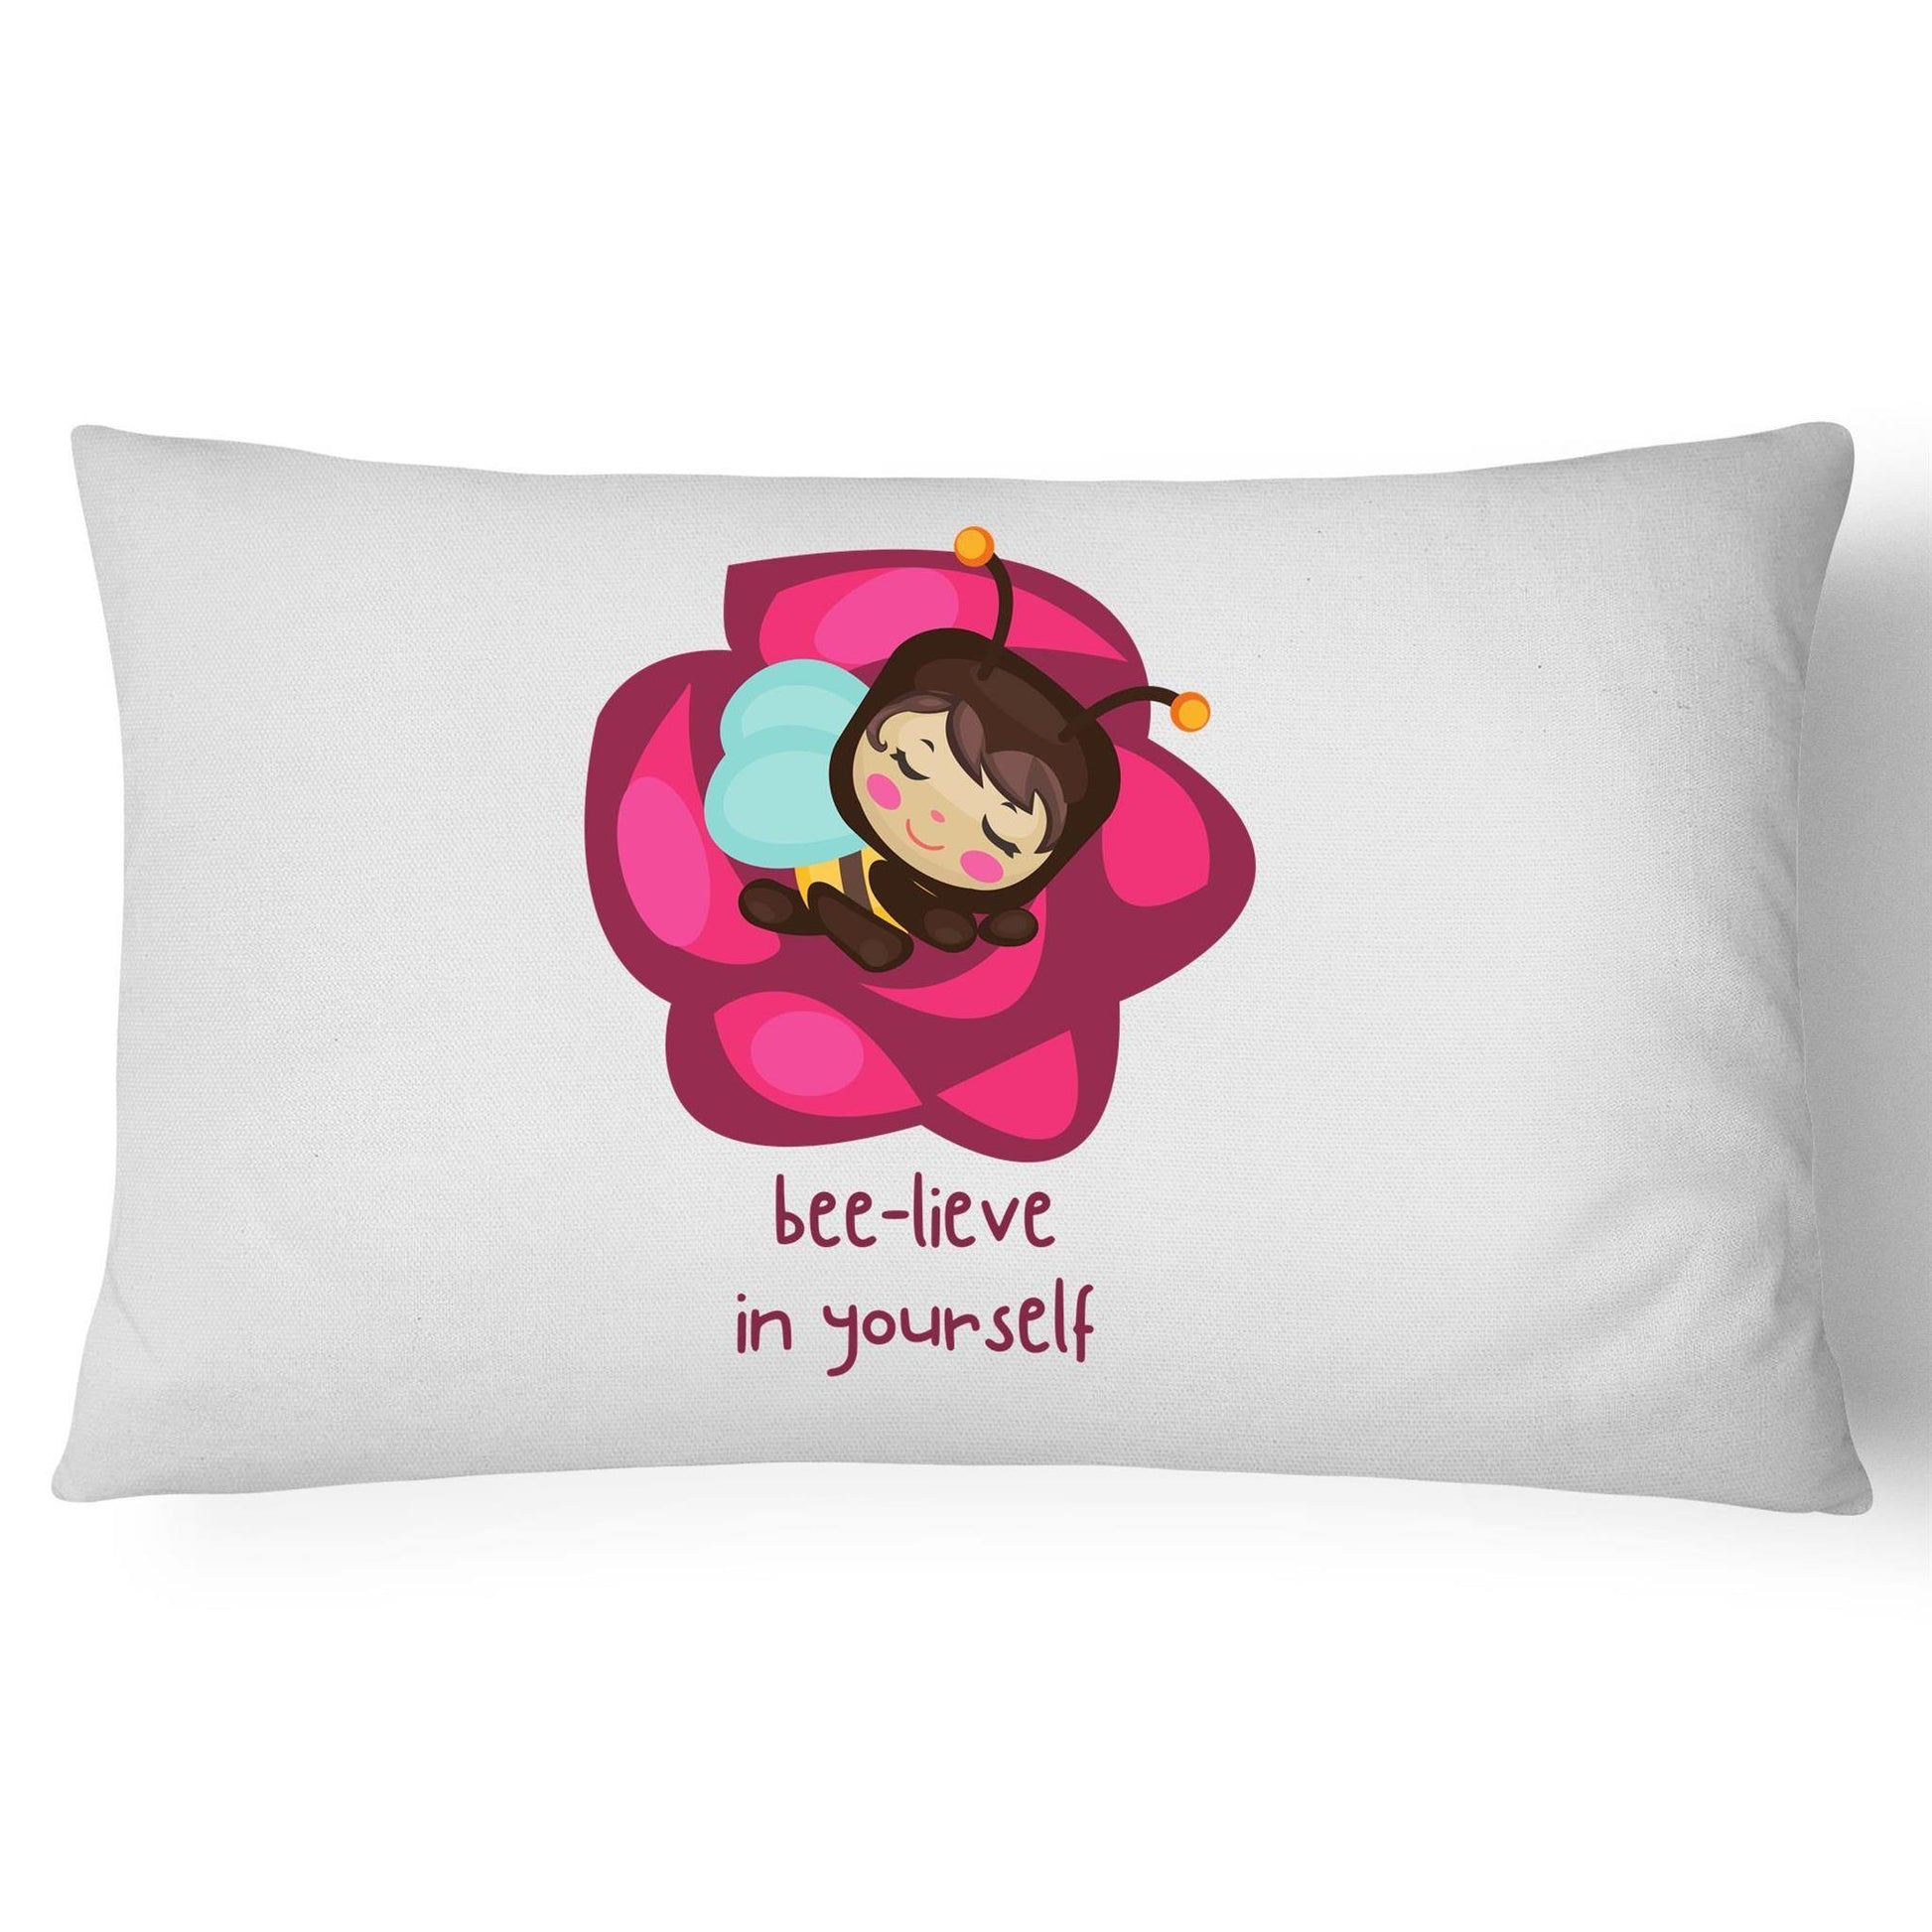 Bee-lieve In Yourself - 100% Cotton Pillow Case White One-Size Pillow Case animal kids